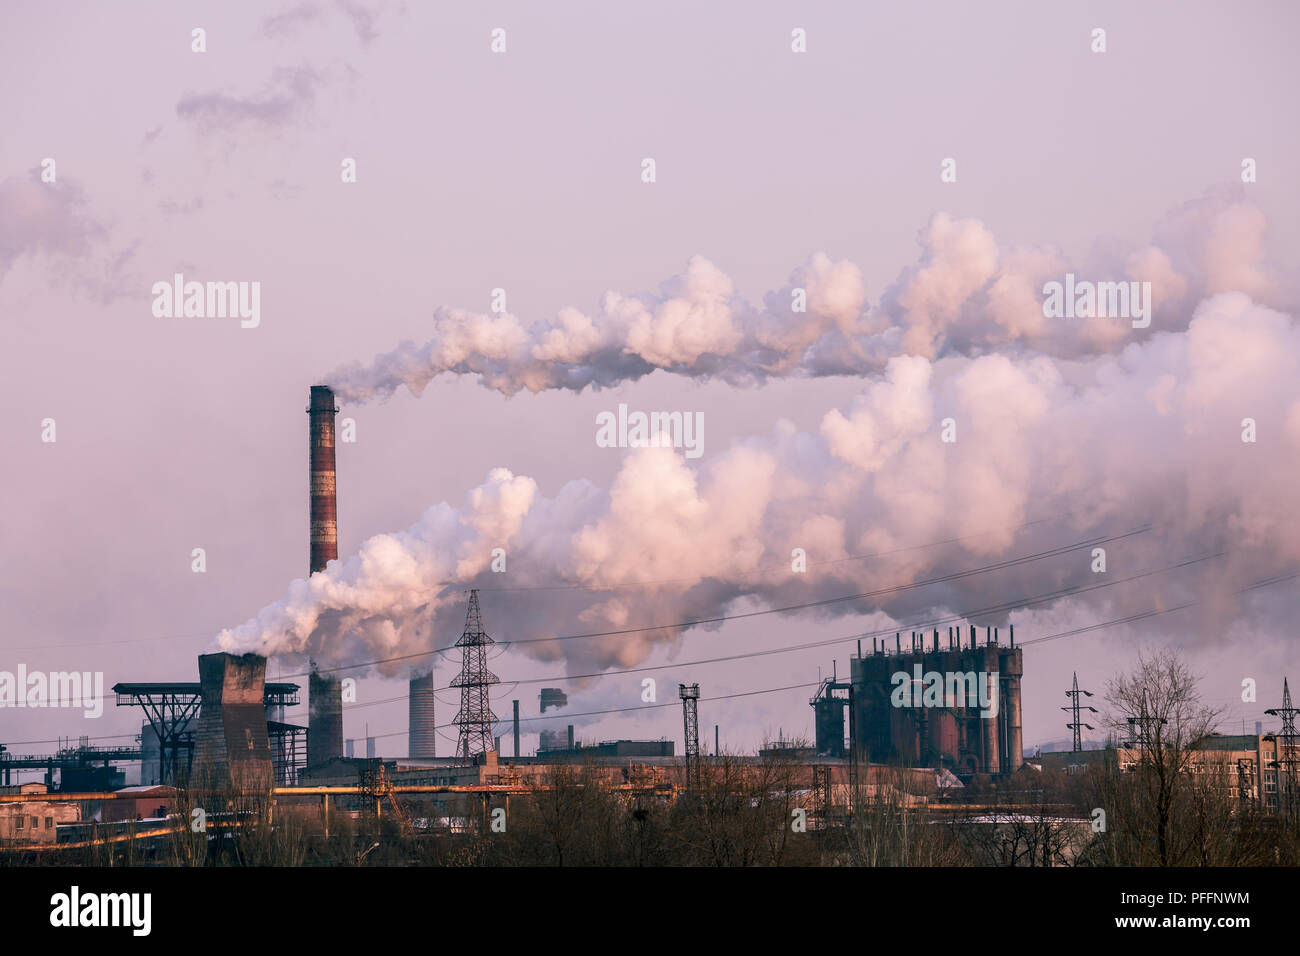 smoke stacks in a working factory emitting steam, smog and air pollution. Stock Photo